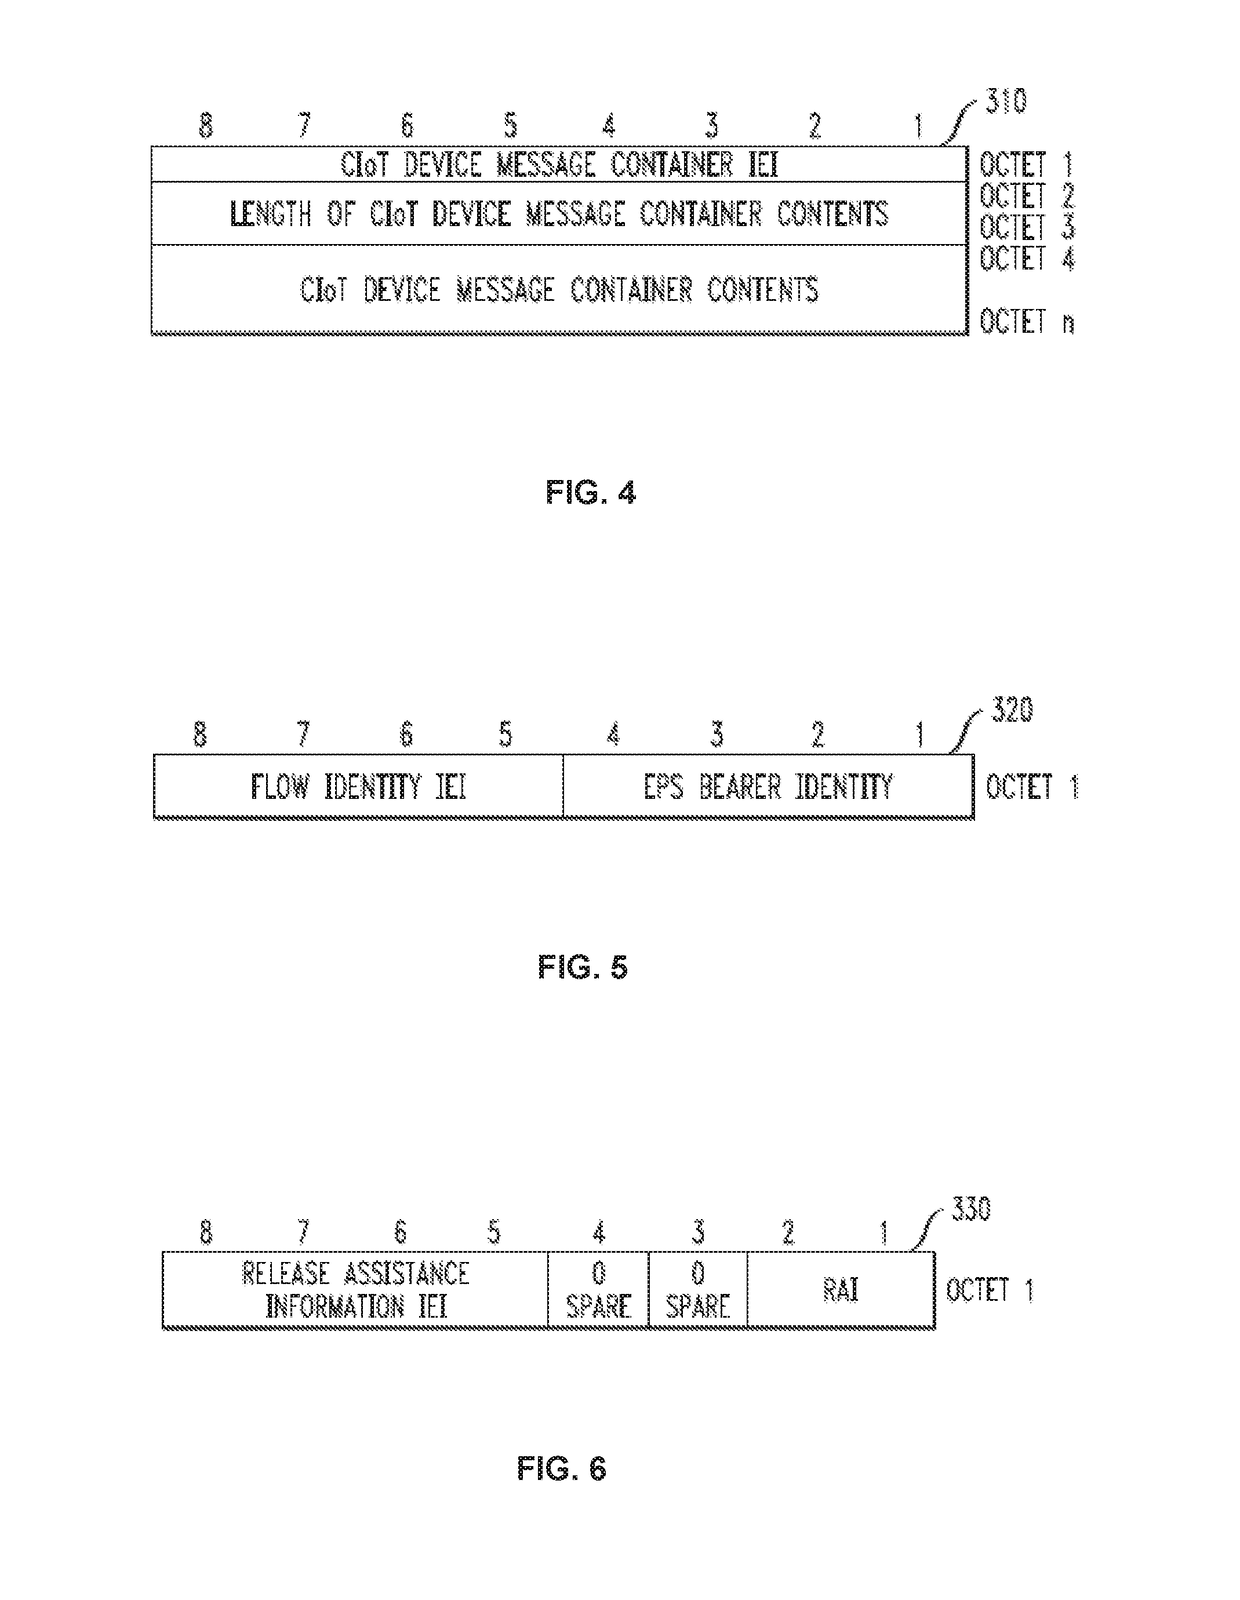 METHOD AND APPARATUS FOR CIoT DEVICE DATA TRANSFER